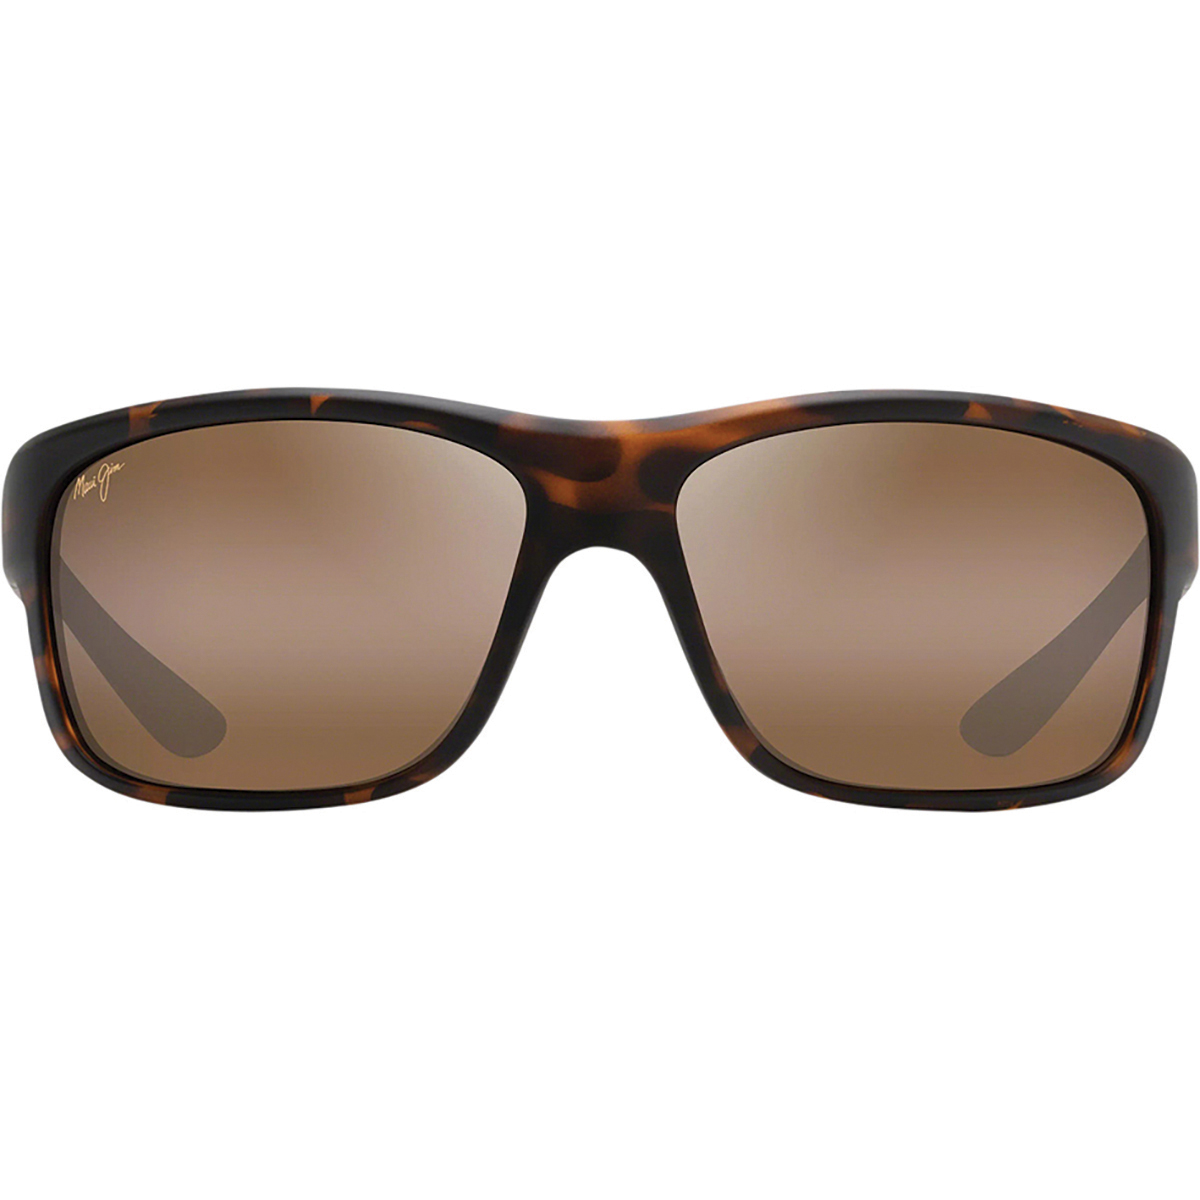 Maui Jim Men's Southern Cross Sunglasses with Brown Mirror